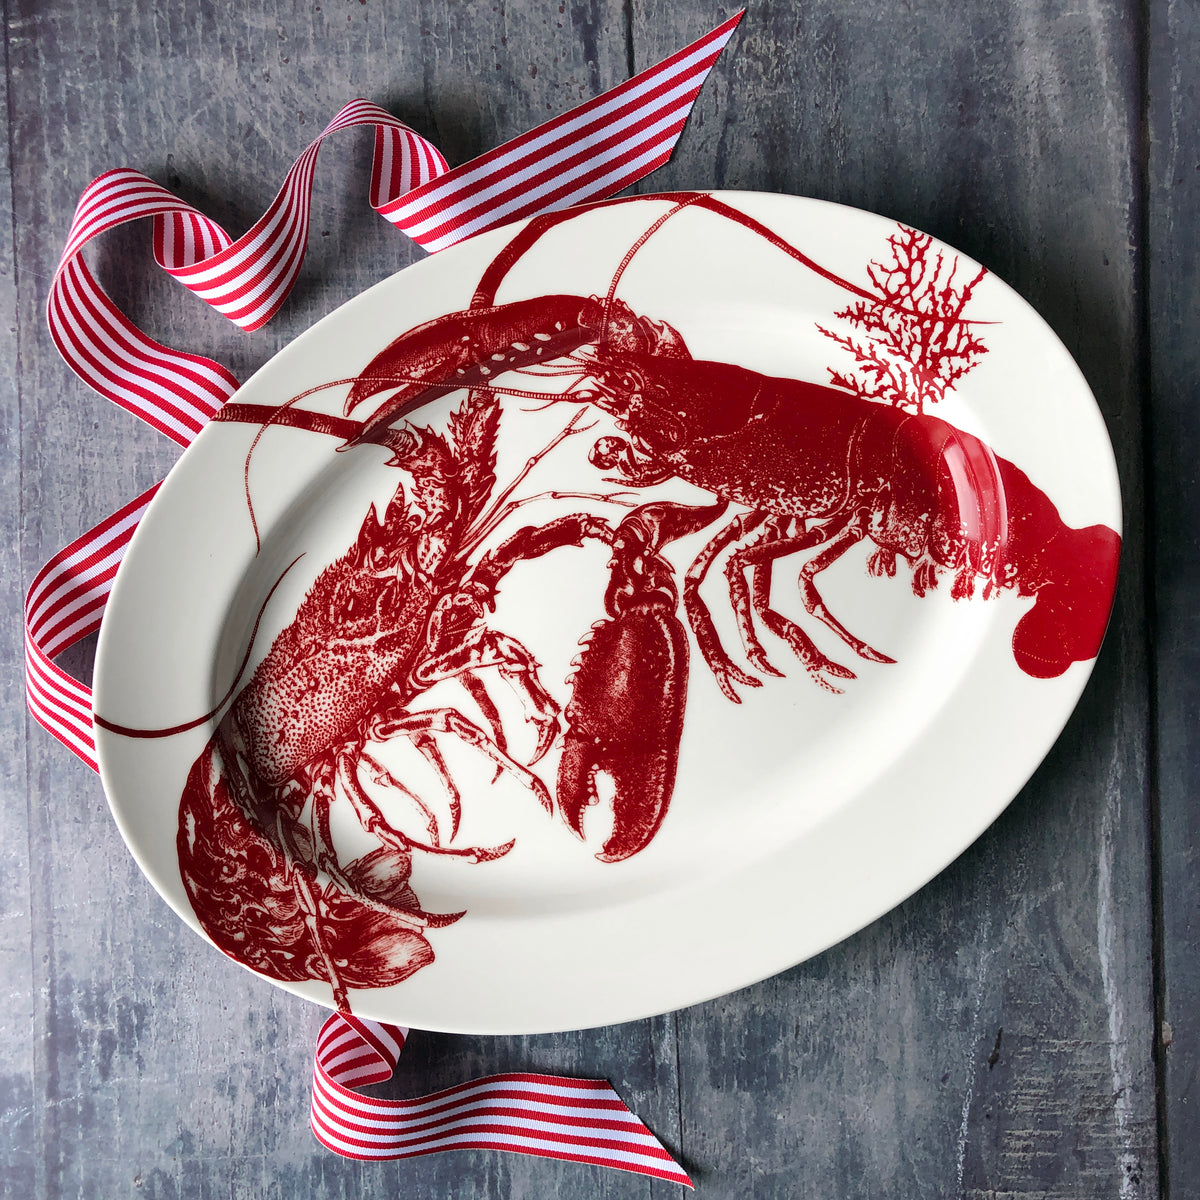 A white oval Father&#39;s Day Bundle with red lobster designs sits elegantly on a dark wooden surface. Red and white striped ribbons are arranged decoratively around the plate, enhancing the nautical theme by Caskata.